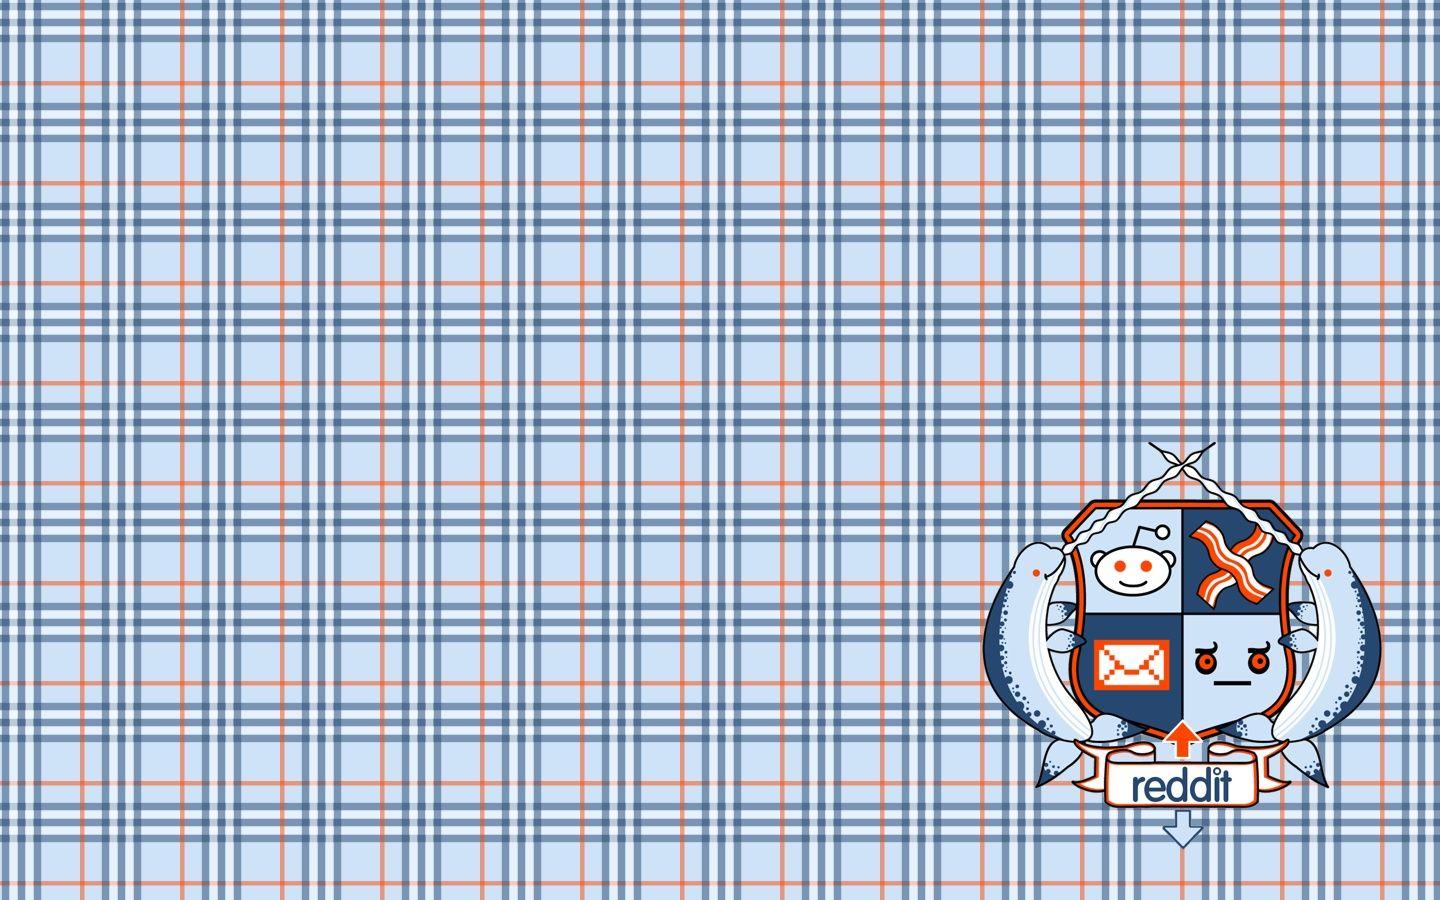 Plaid Reddit Widescreen Wallpaper Featuring Coat of Arms